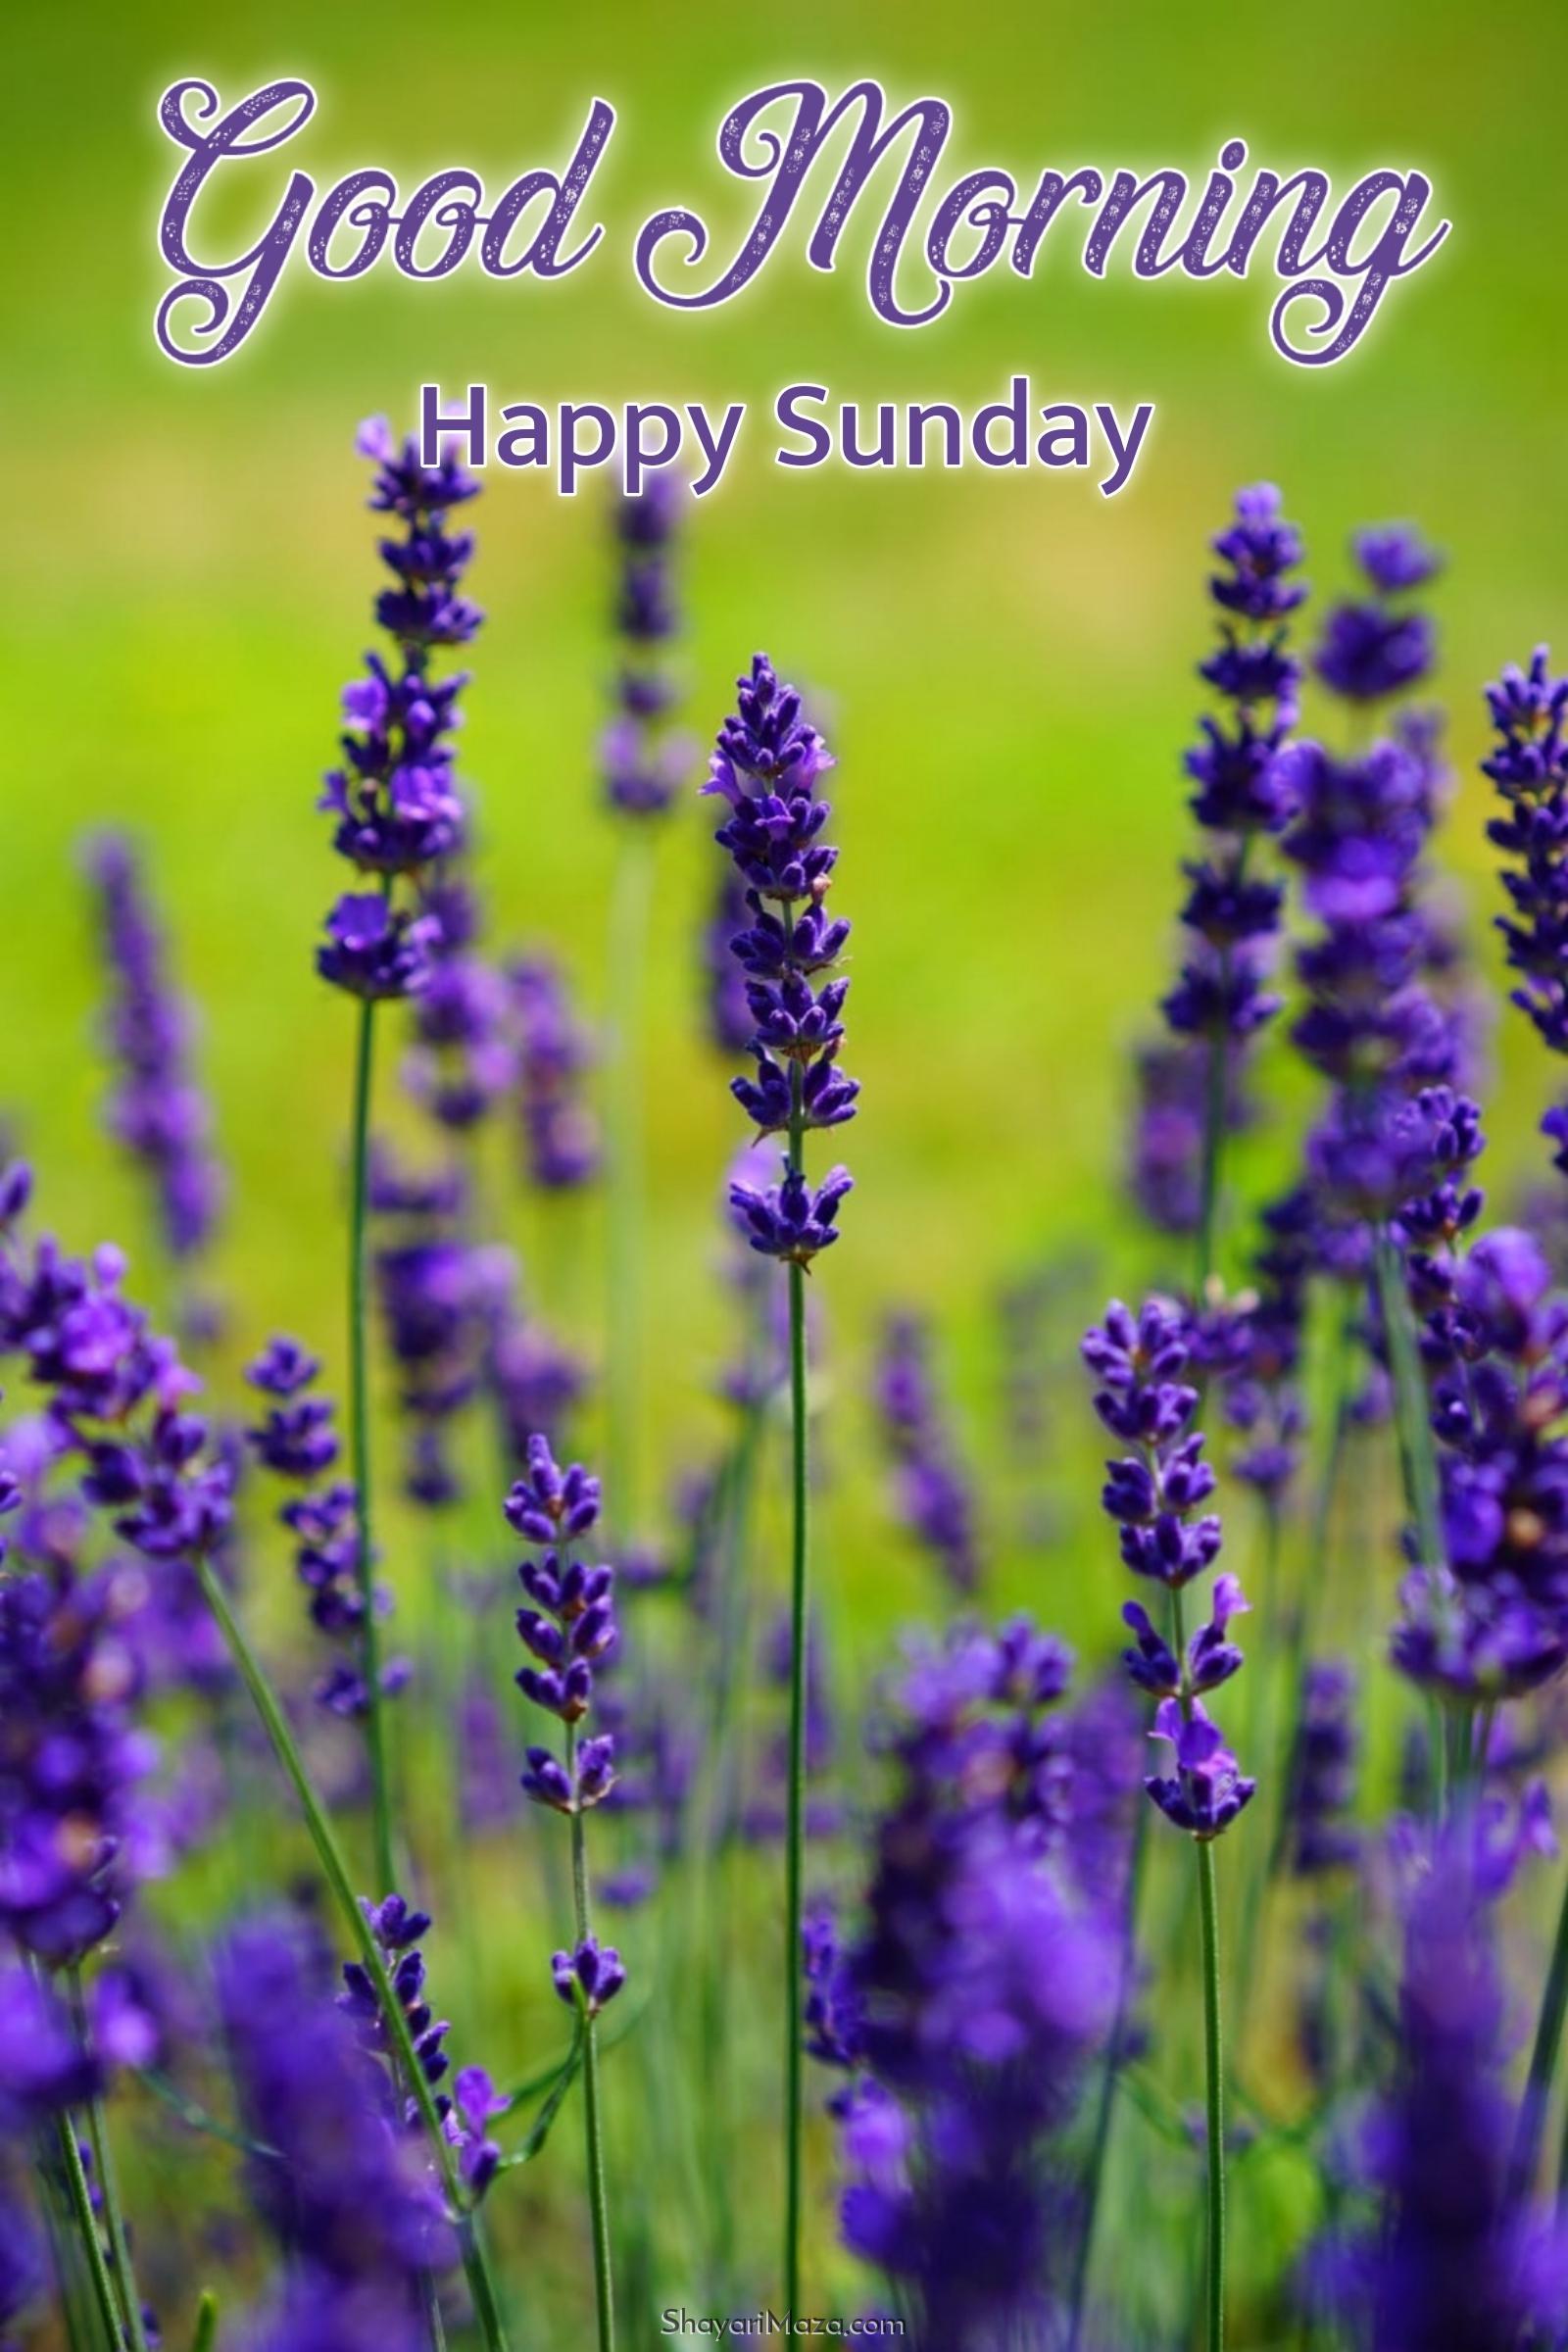 Sunday Greetings Images